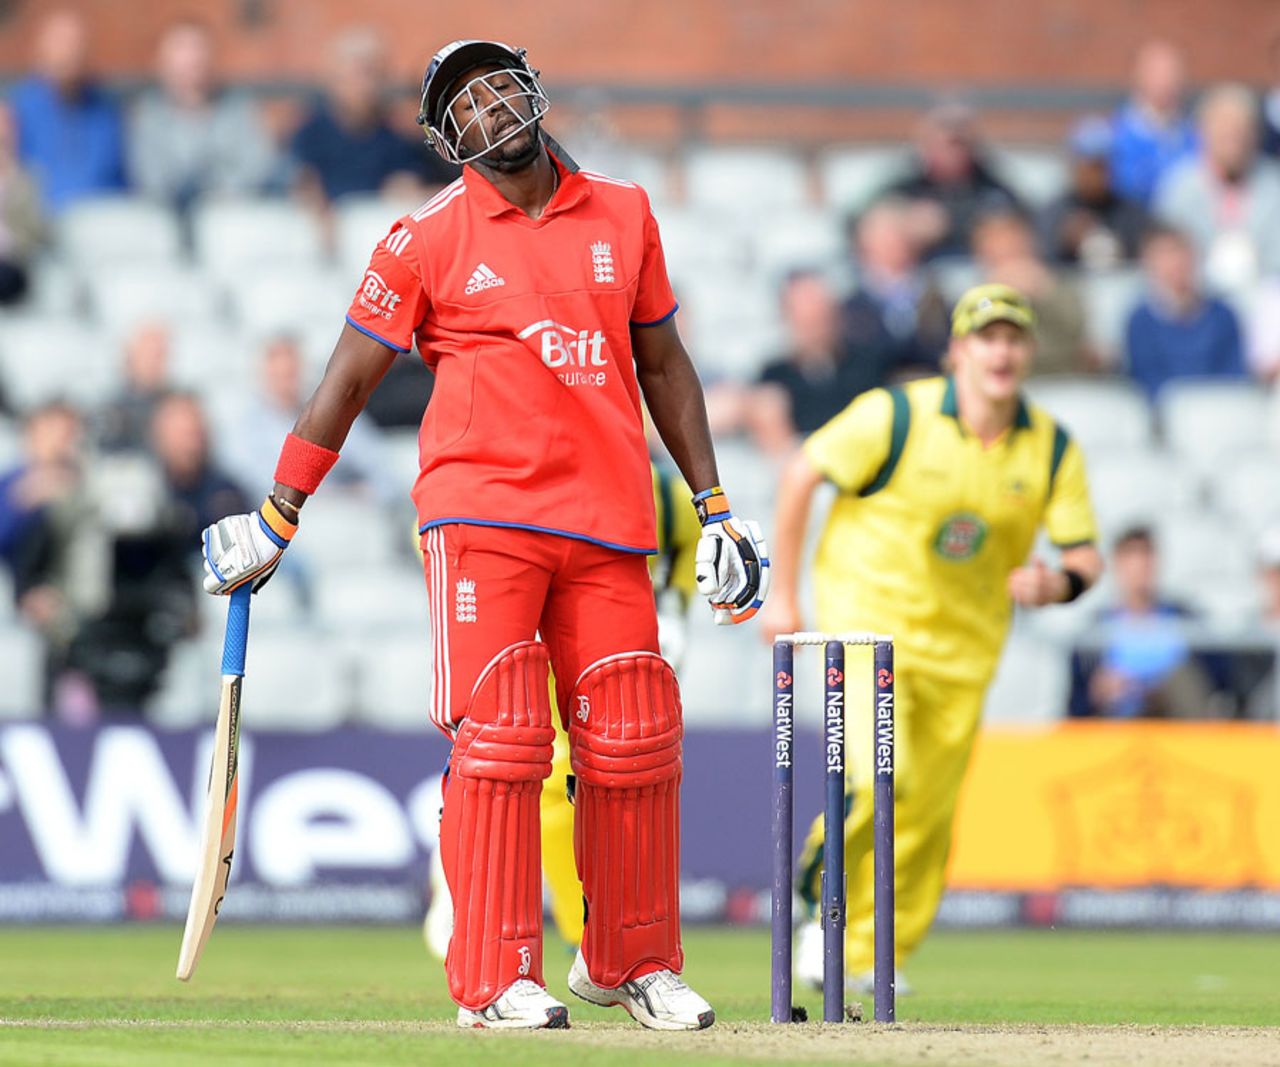 Michael Carberry hangs his head having picked out backward point with a cut, England v Australia, 2nd NatWest ODI, Old Trafford, September 8, 2013